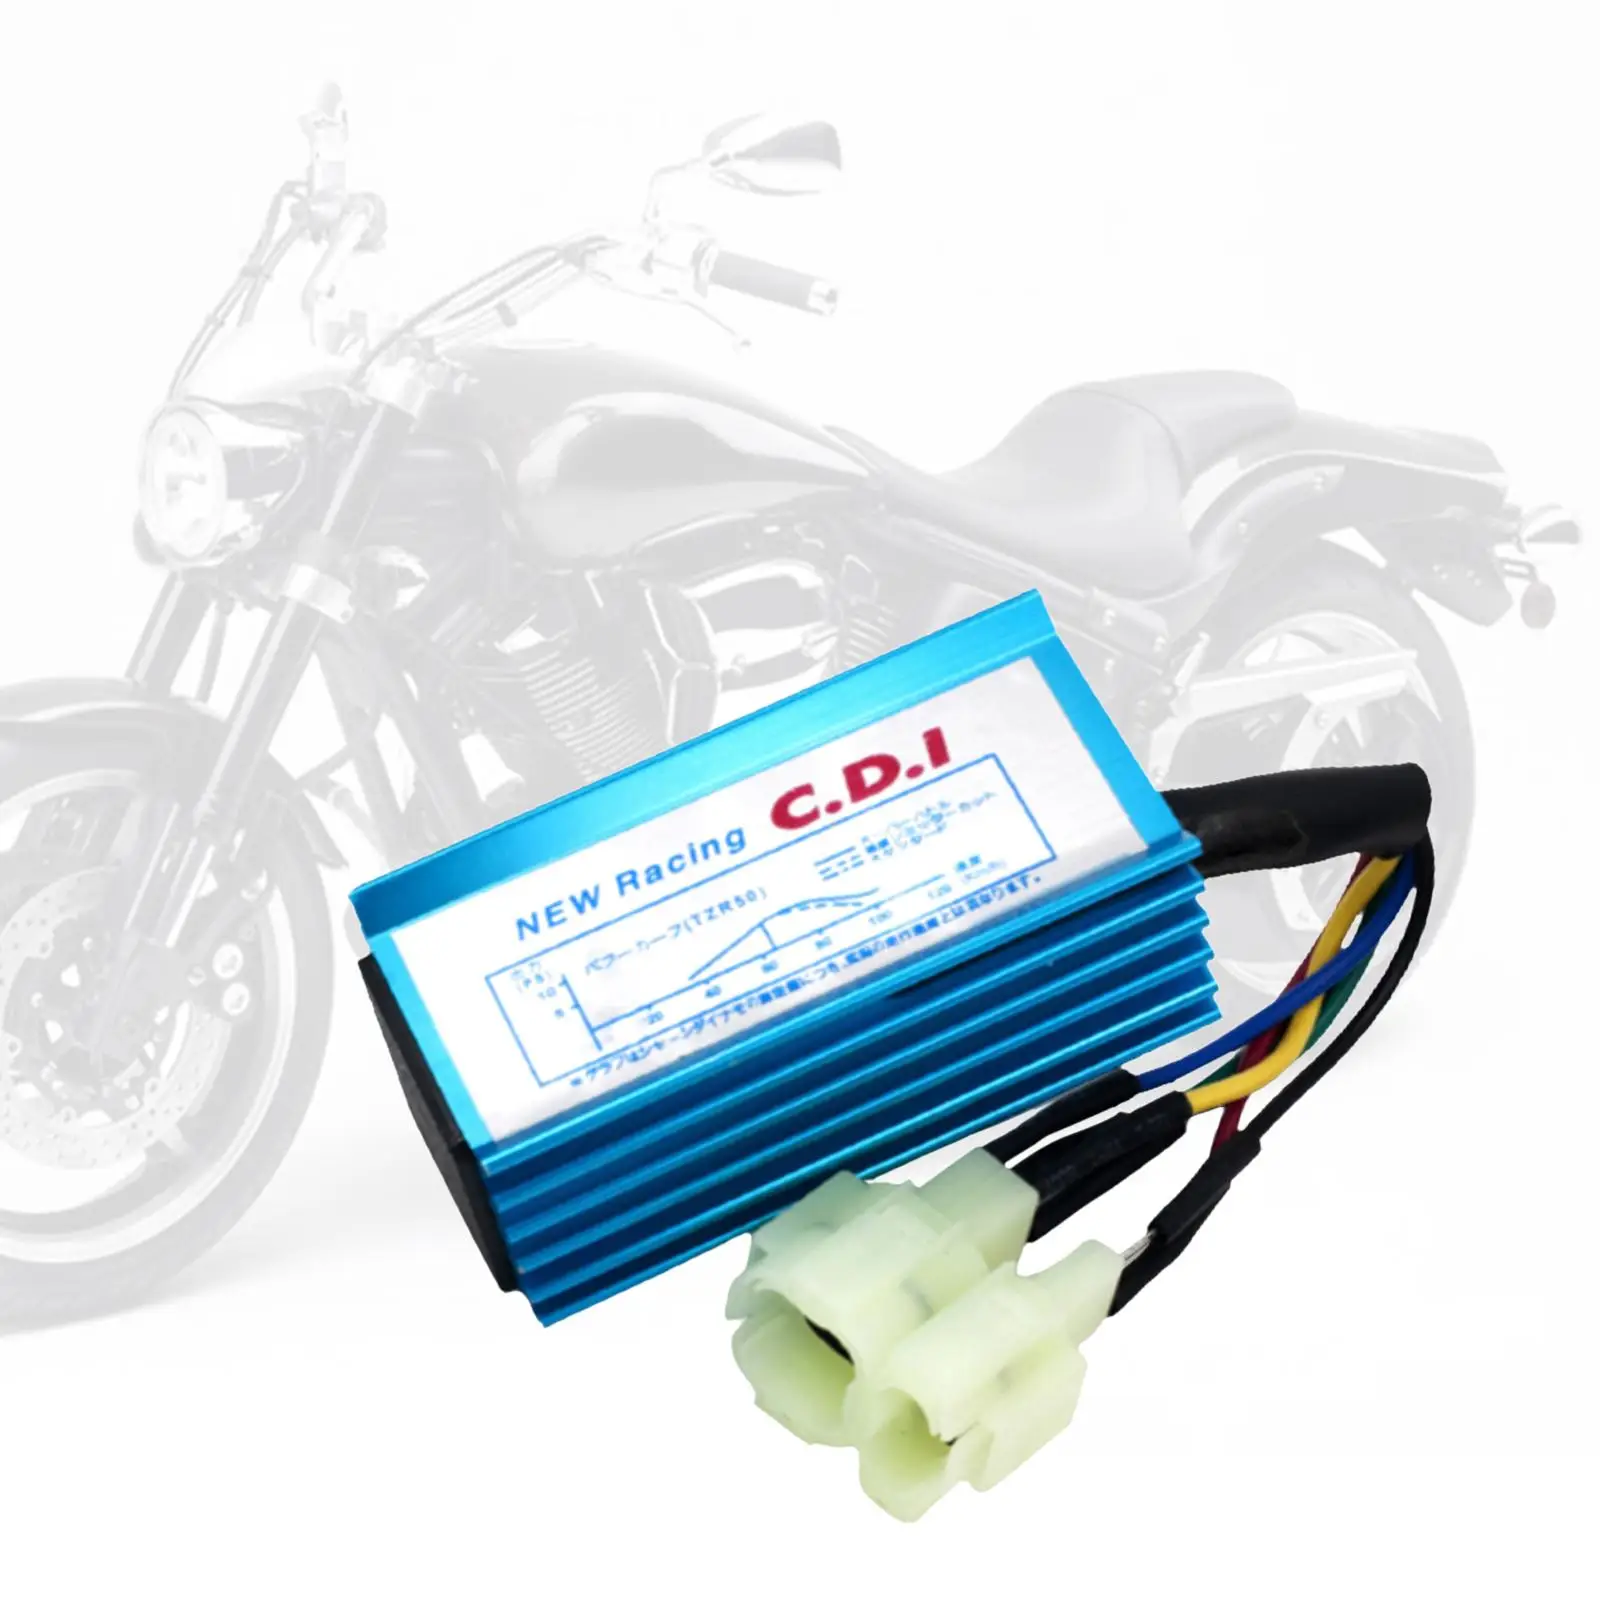 Gy6 Racing Cdi Box Blue Aluminum Fits for Gy6 50cc-250cc Motorbikes Mopeds